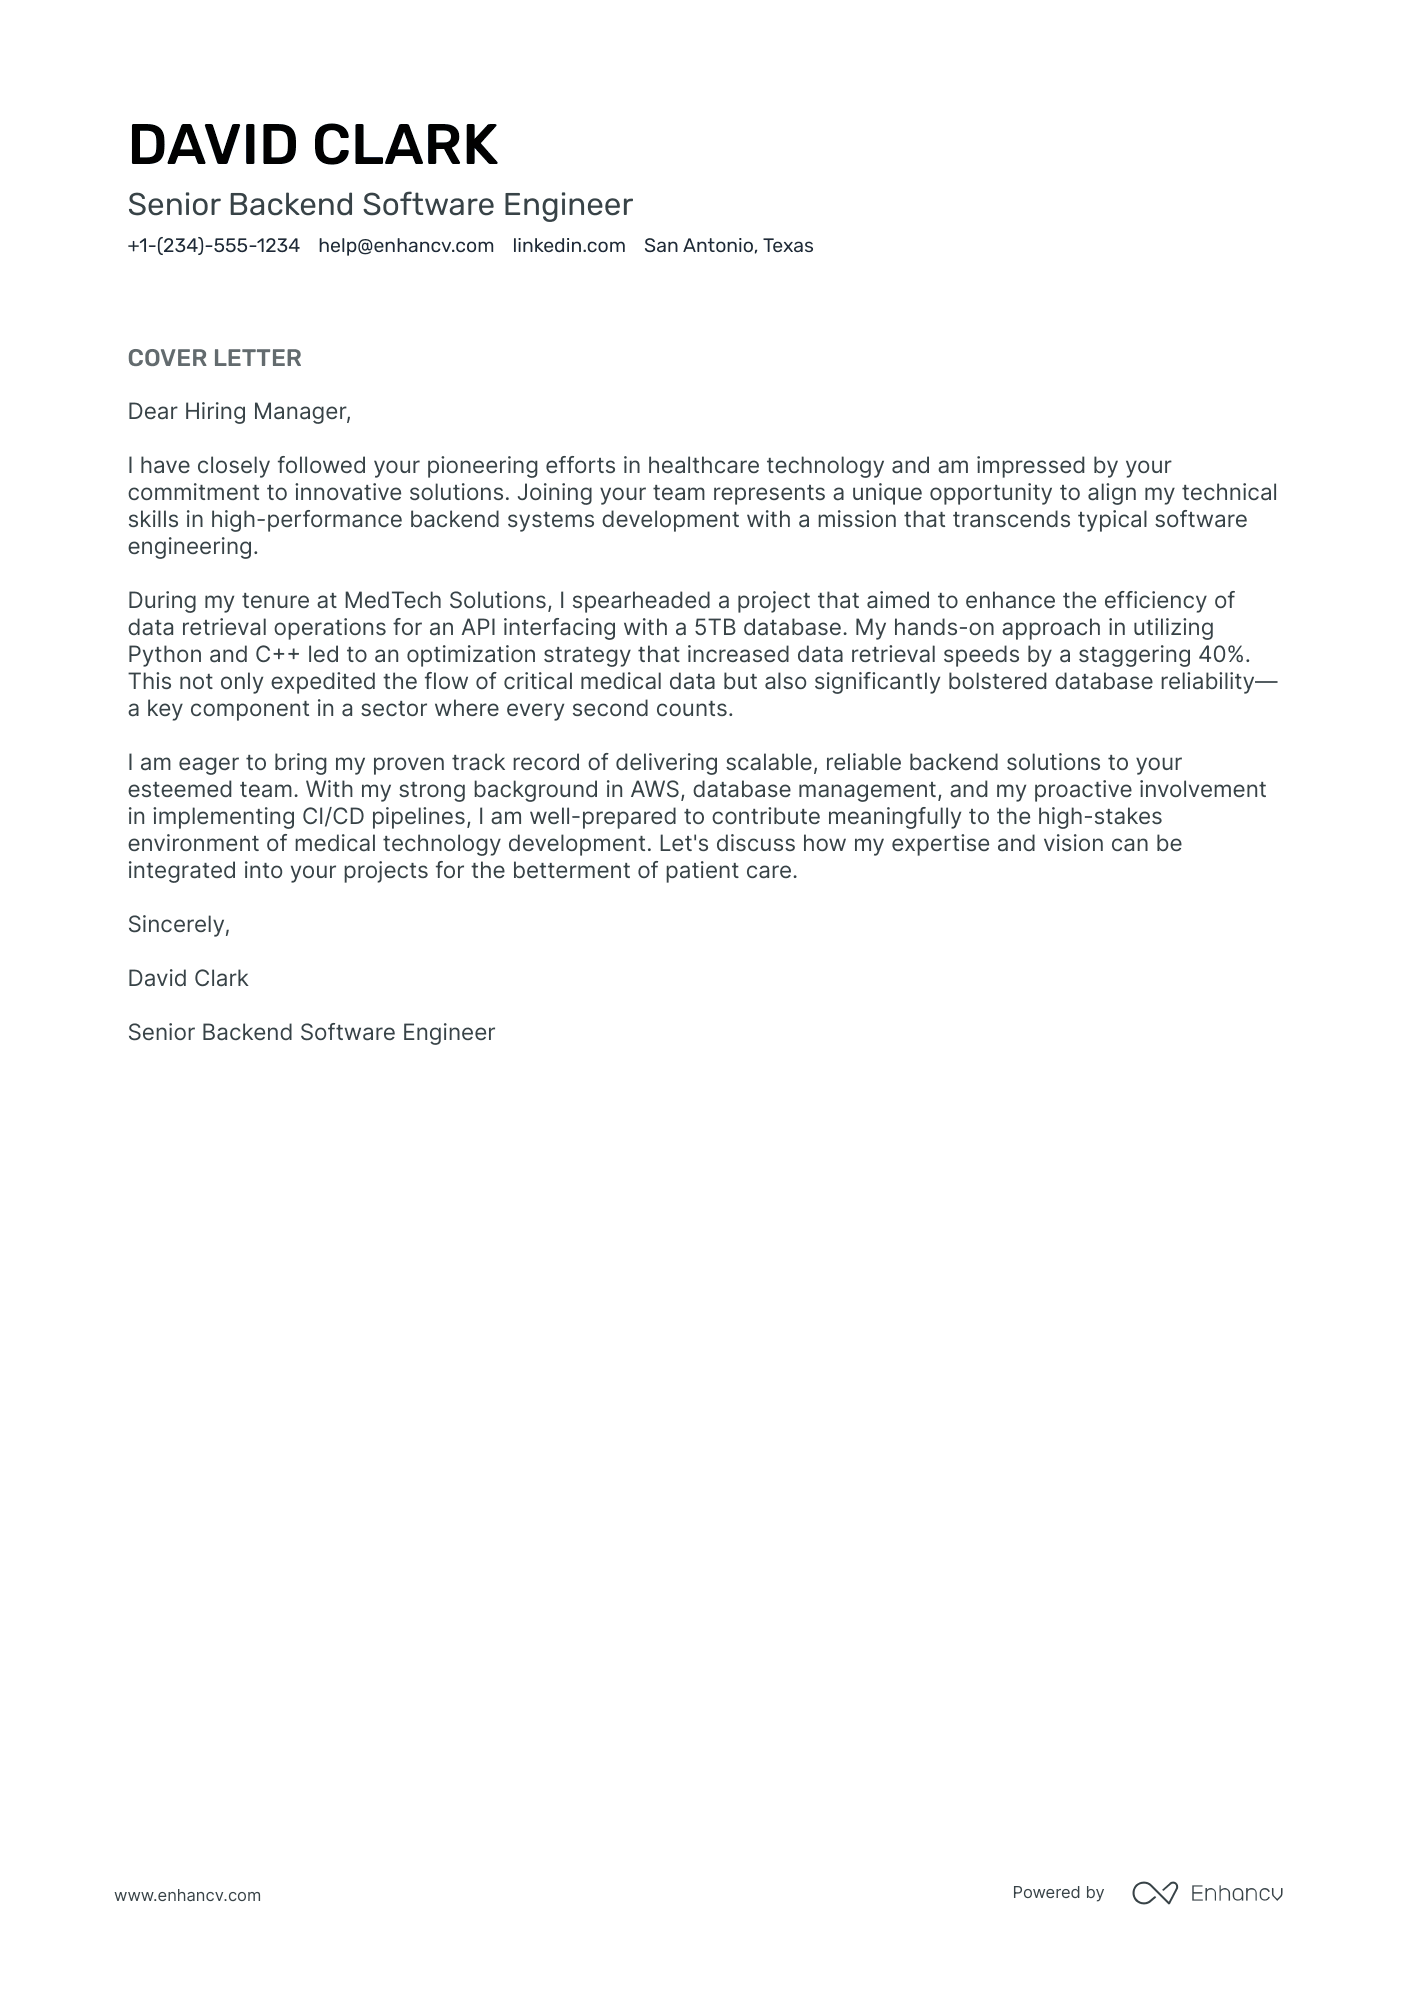 VP of Engineering cover letter